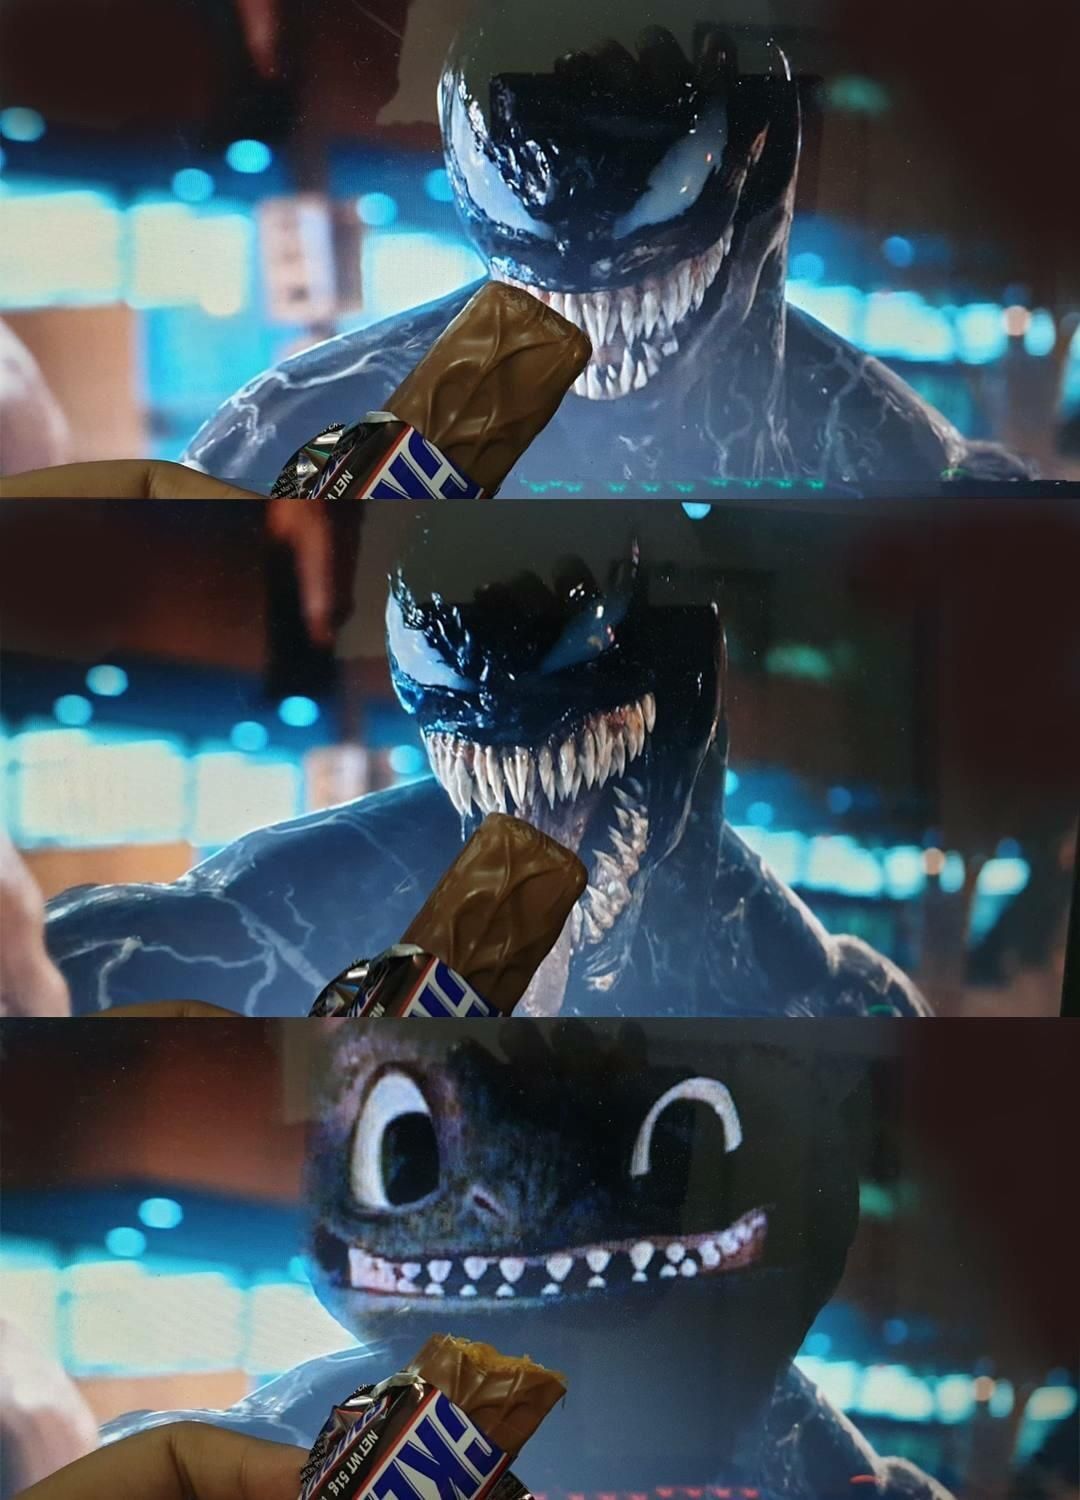 Want some snickers?